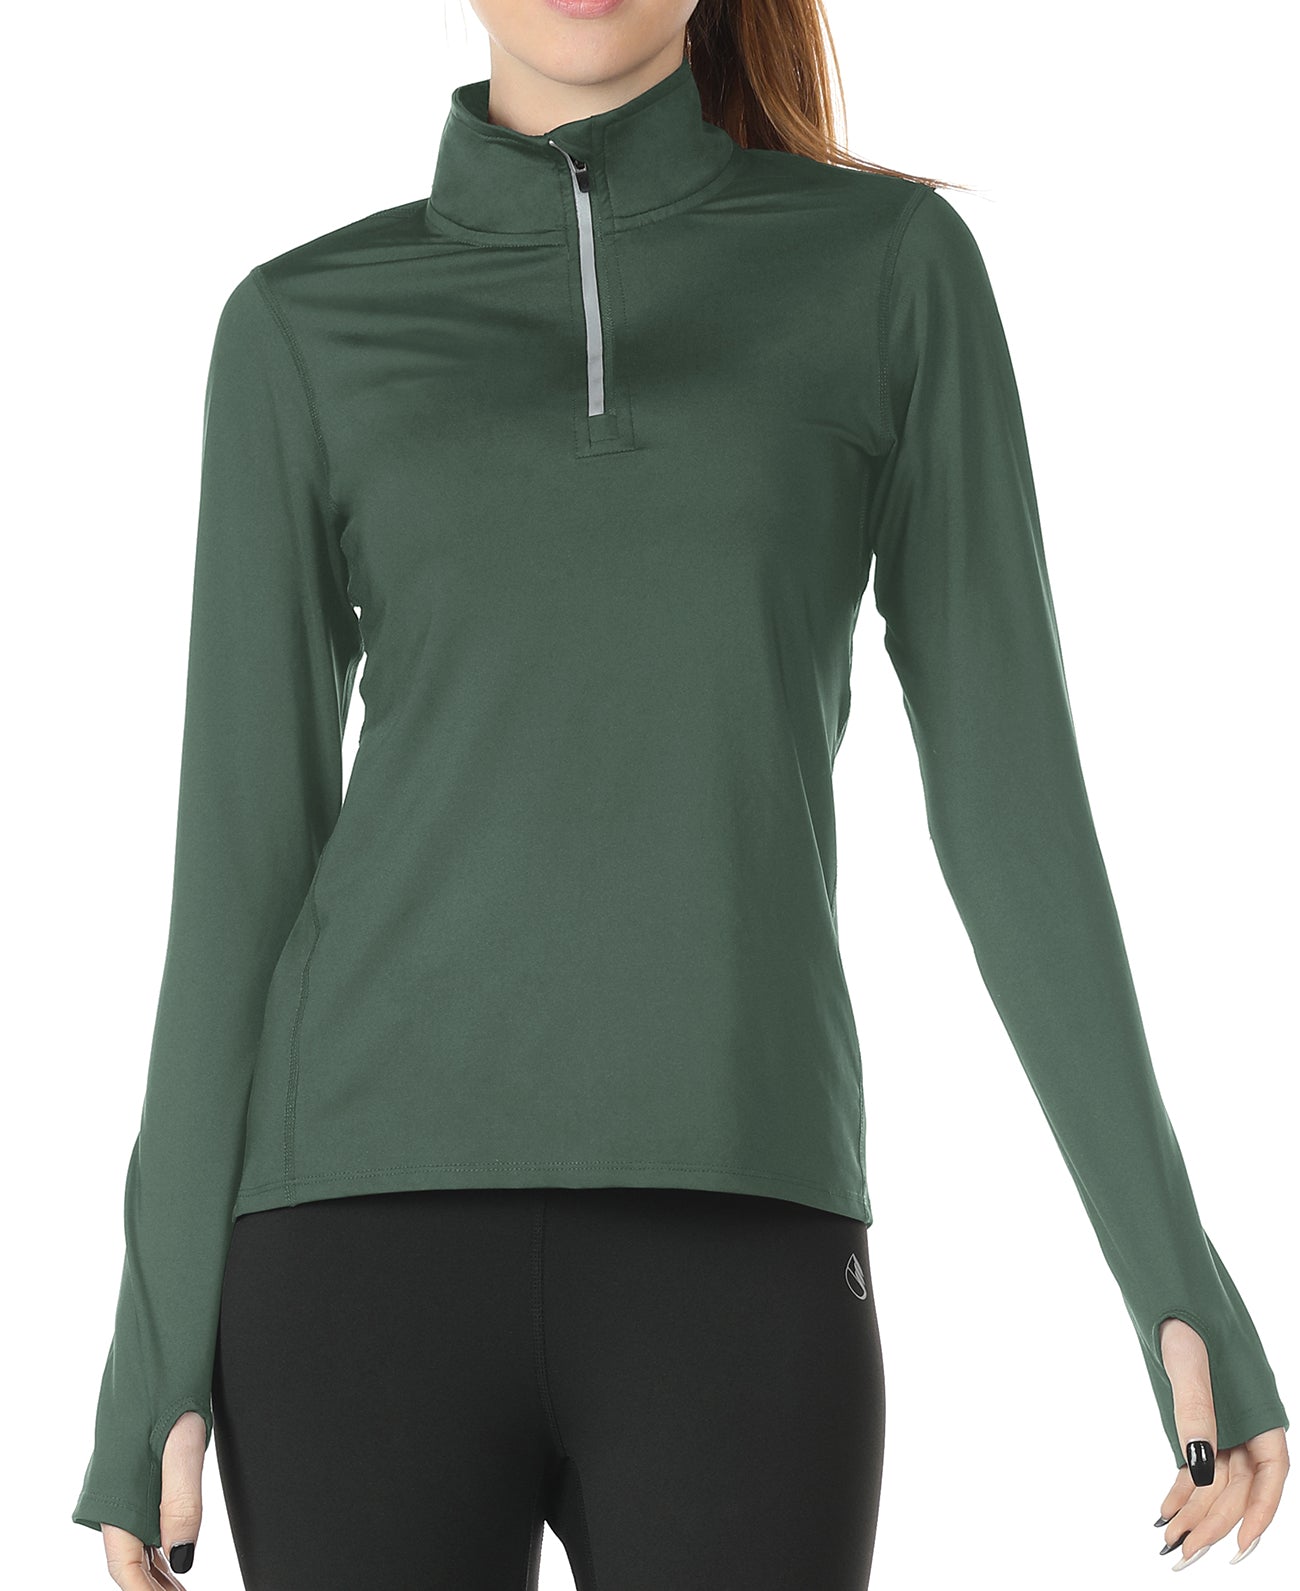 icyzone Workout Long Sleeve Shirts for Women - Yoga Running Tops